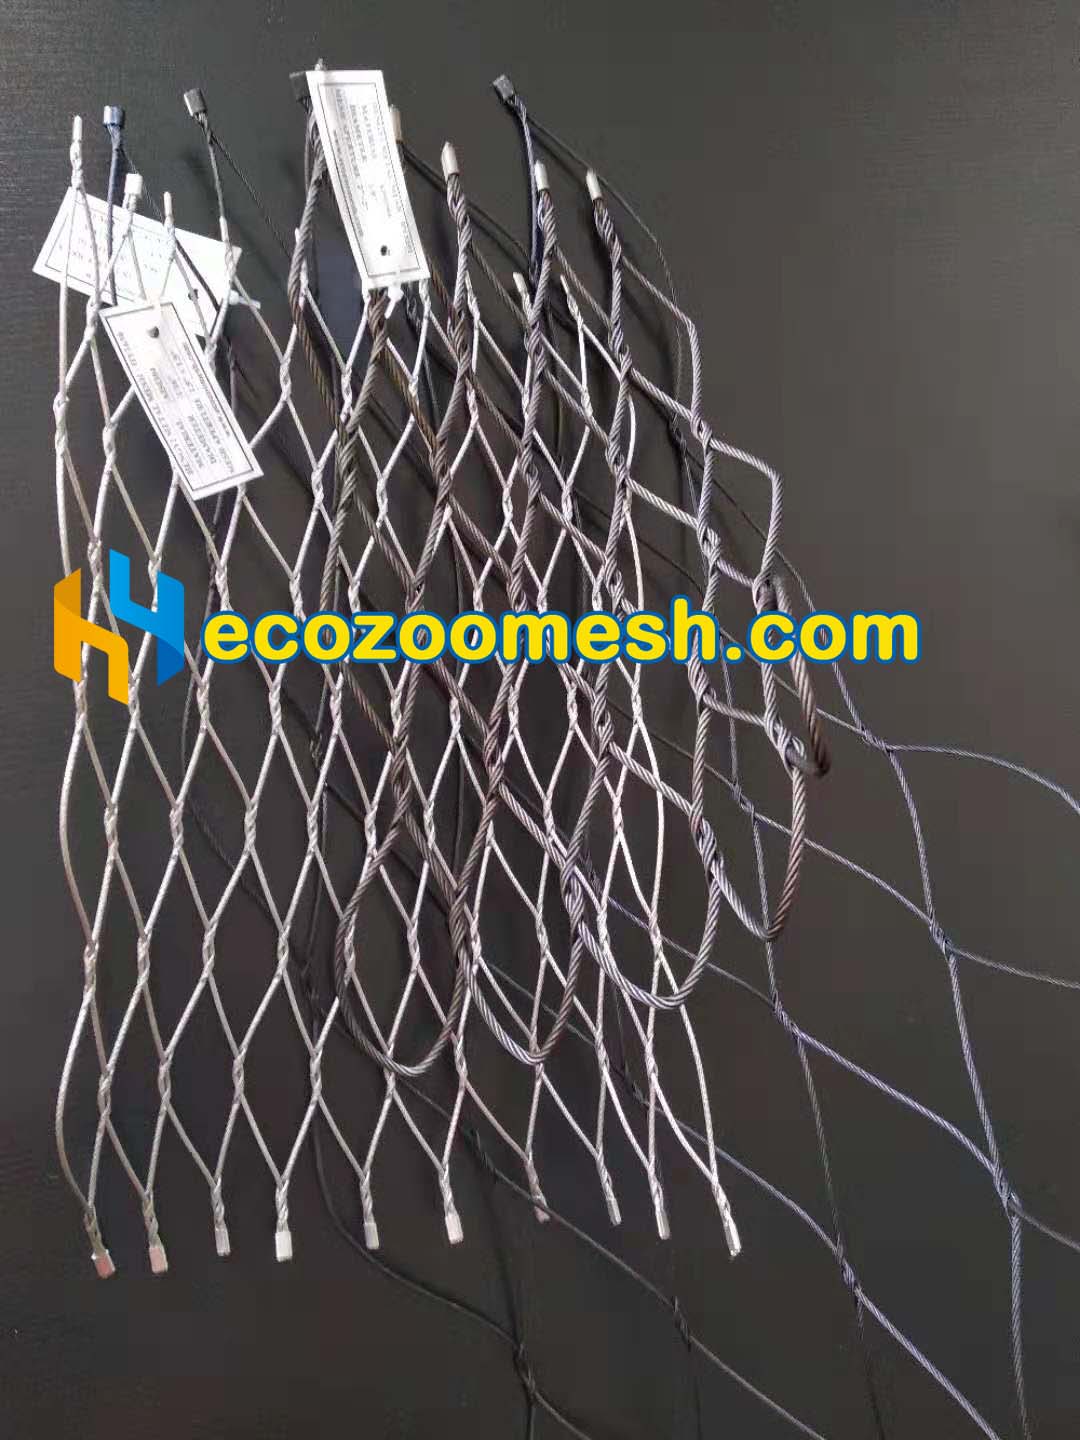 Stainless Steel Fencing Net